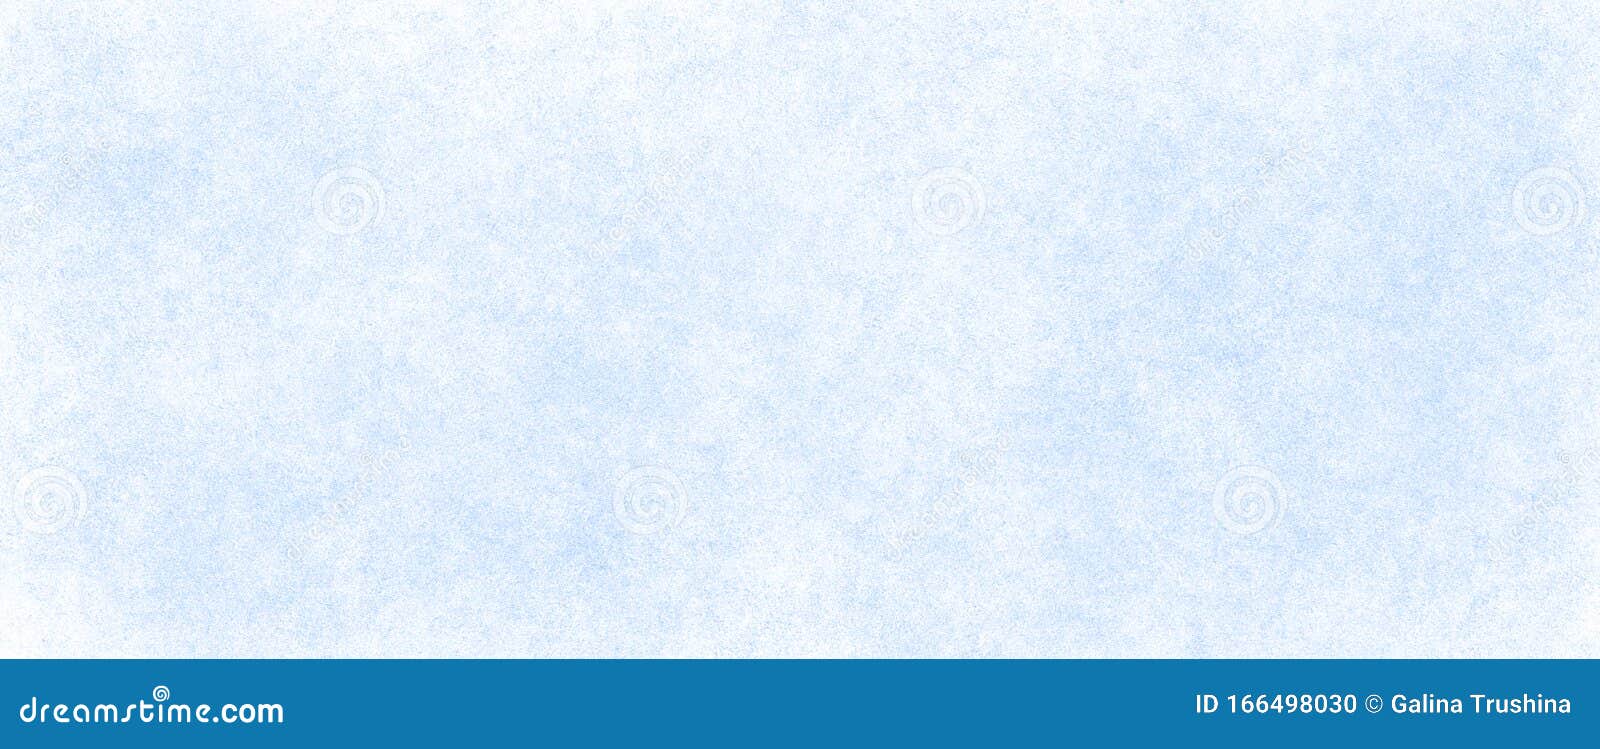 ligtht blue texture of paper background with copy space for text or image